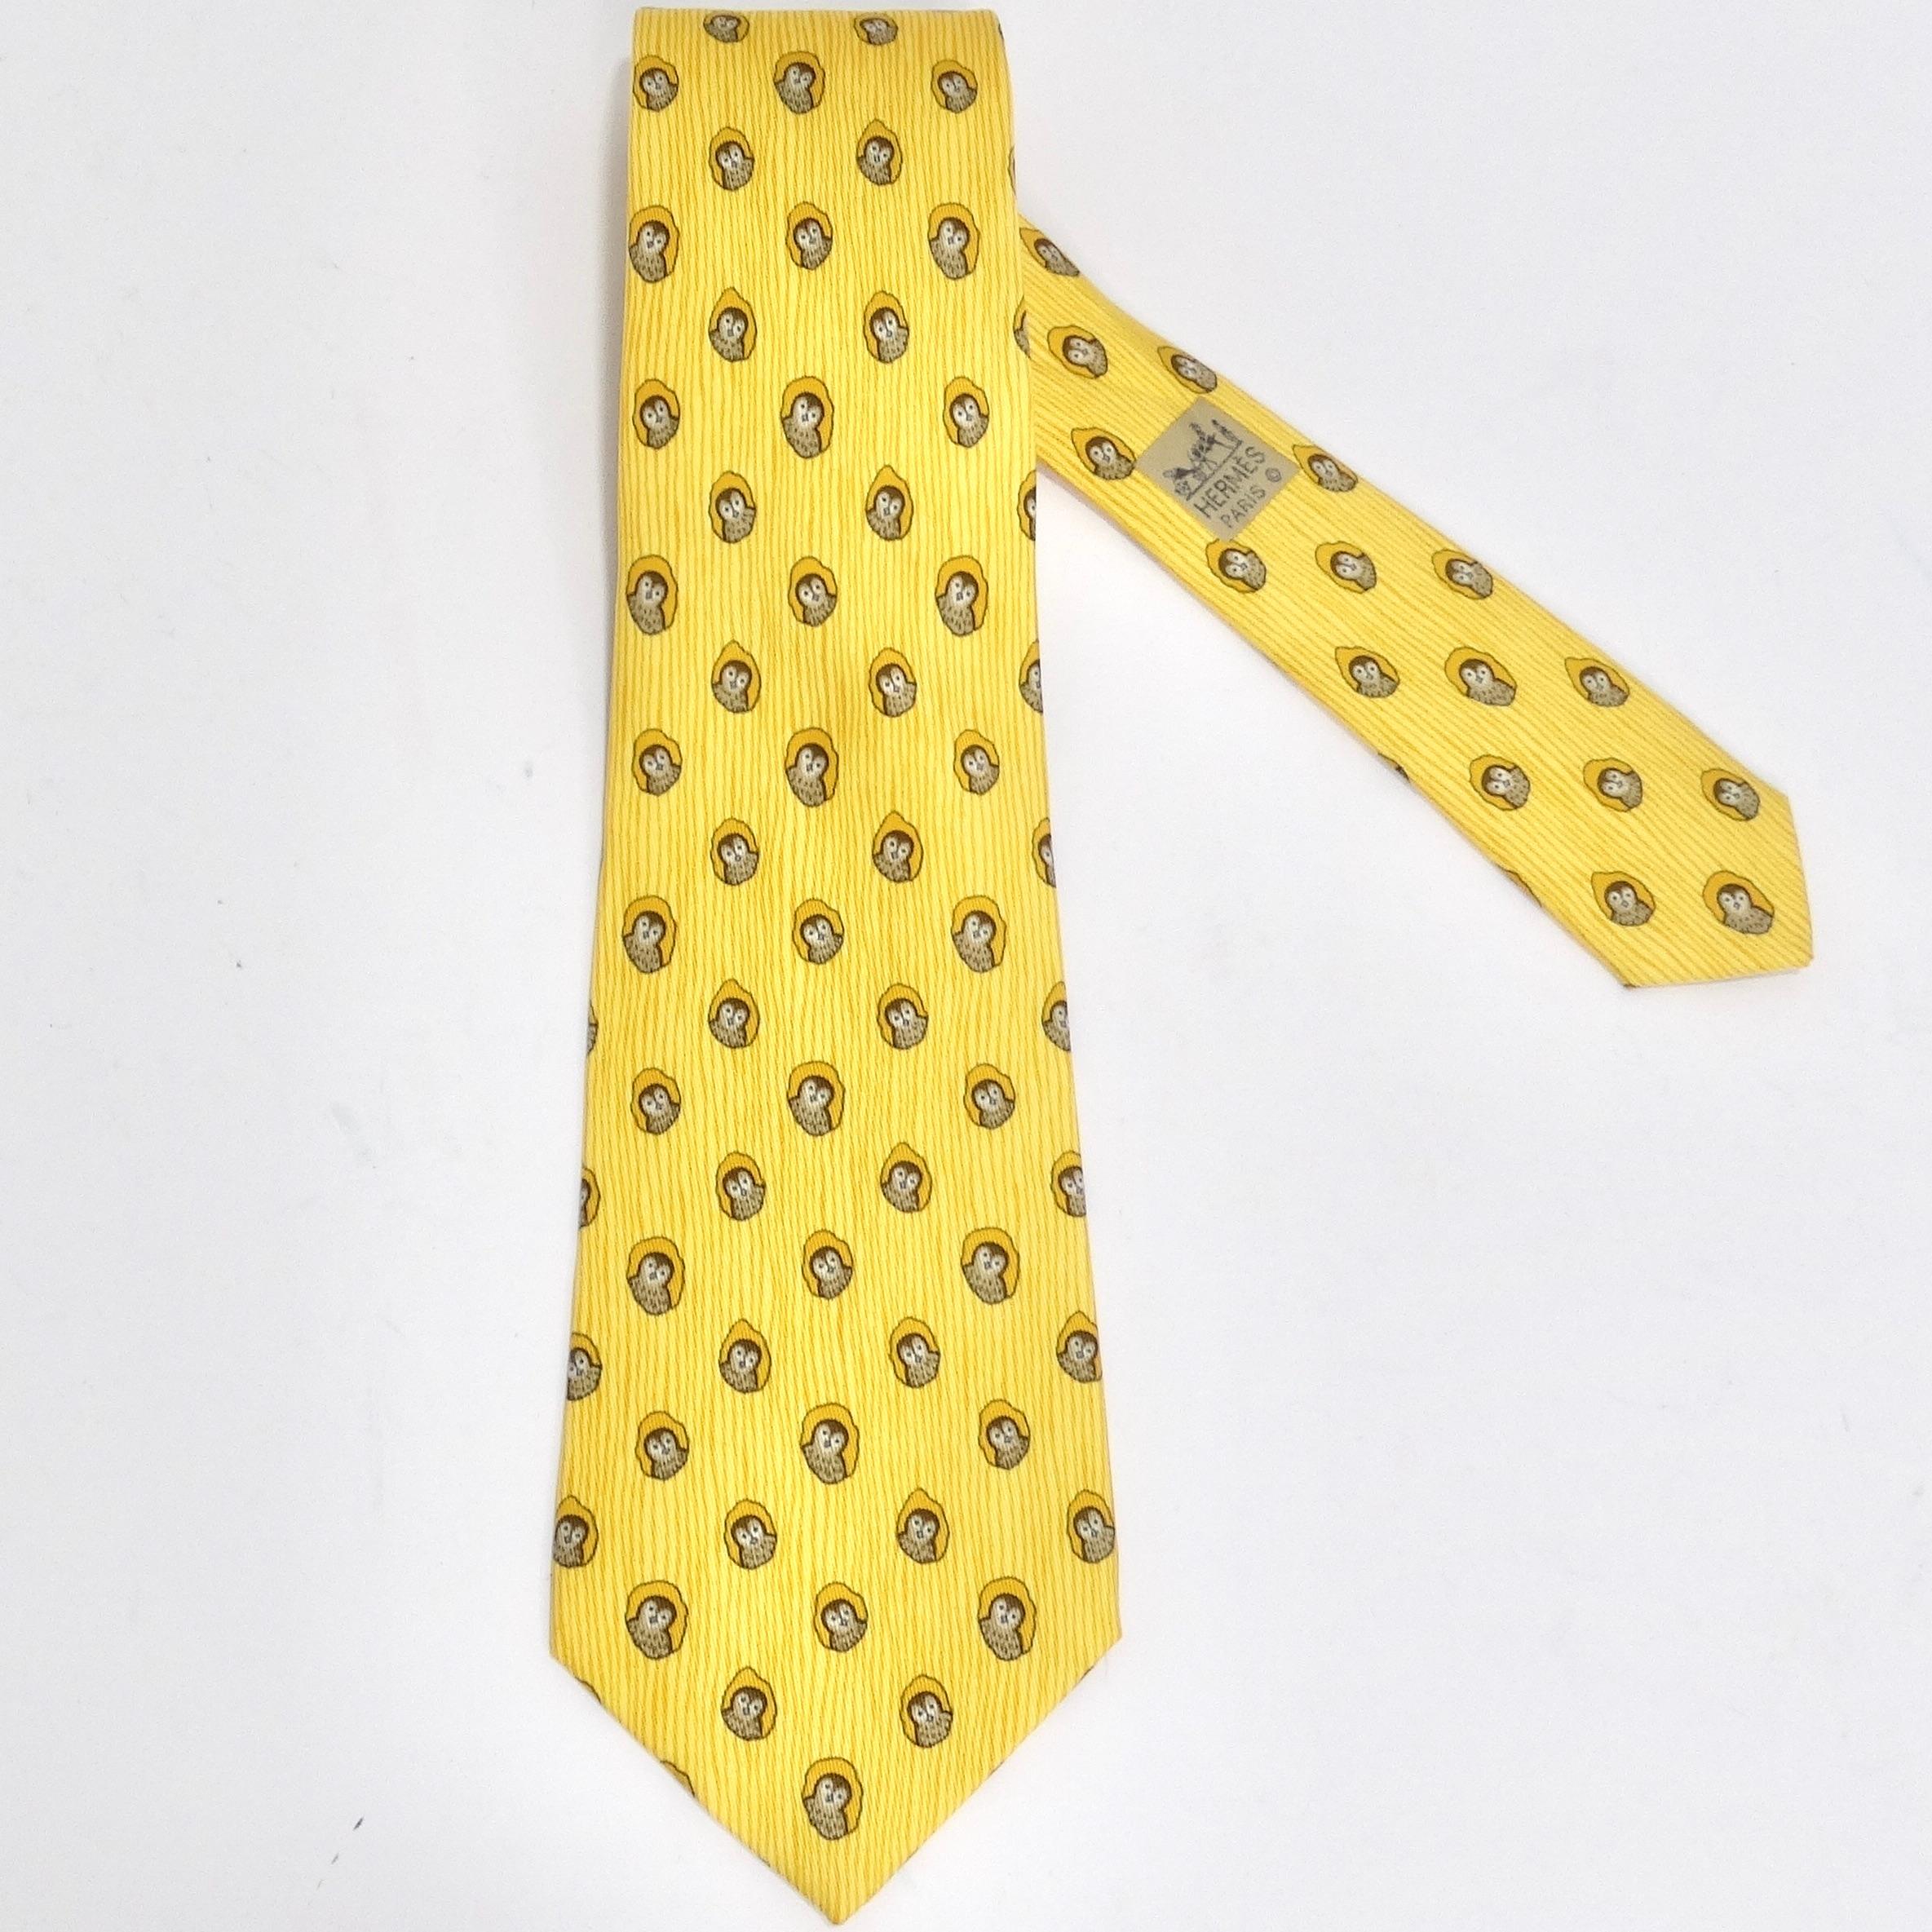 Introducing the Hermes 1990s Yellow Owl Print Tie – a classic closet staple with a playful twist! This tie combines timeless elegance with a vibrant pop of color and whimsy. The striking yellow silk is adorned with charming owl prints, making it a